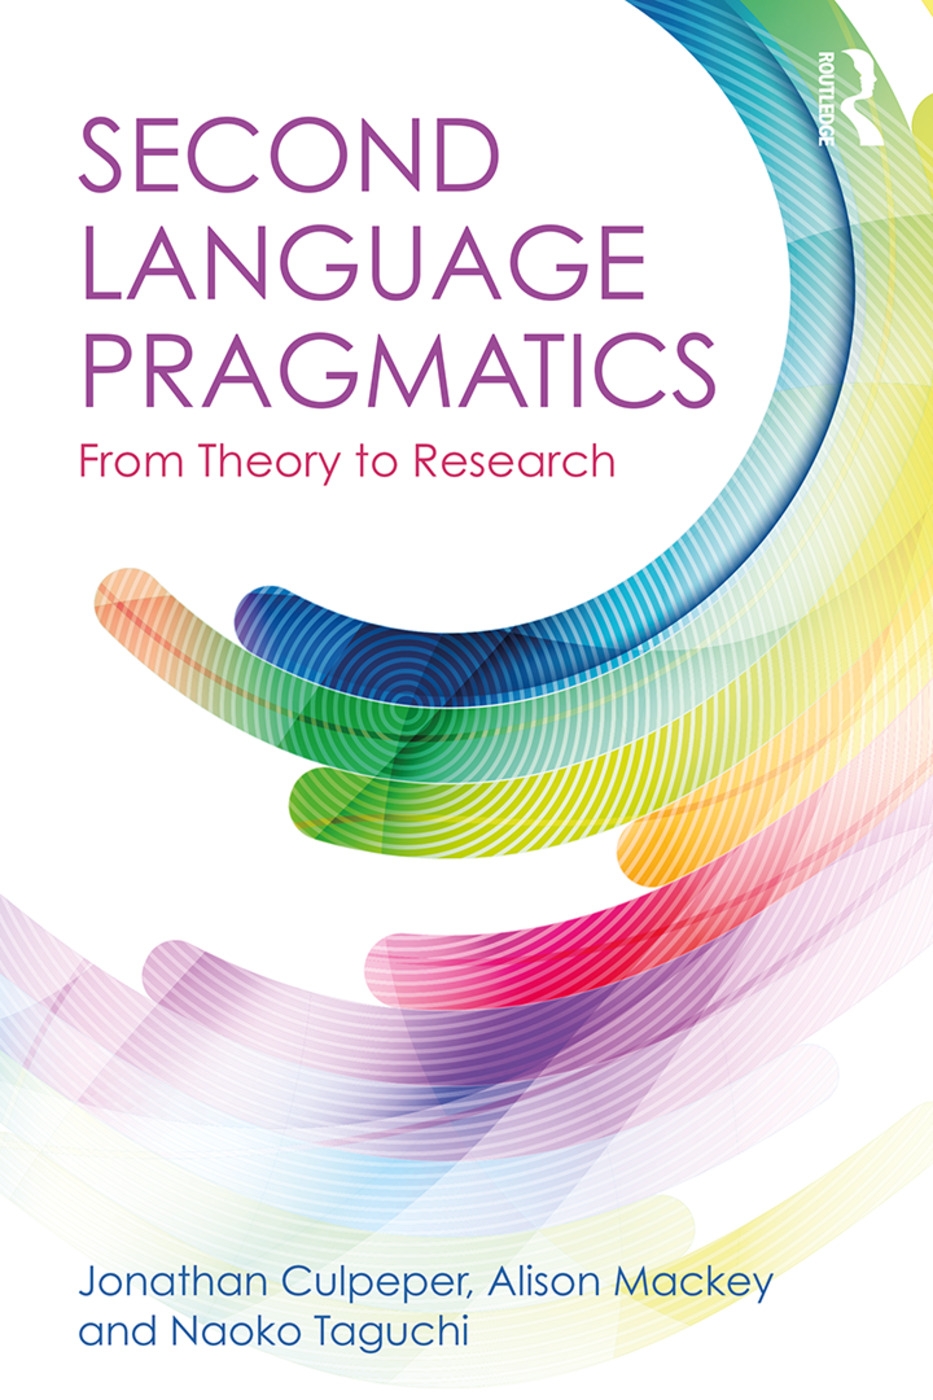 Second Language Pragmatics: From Theory to Research